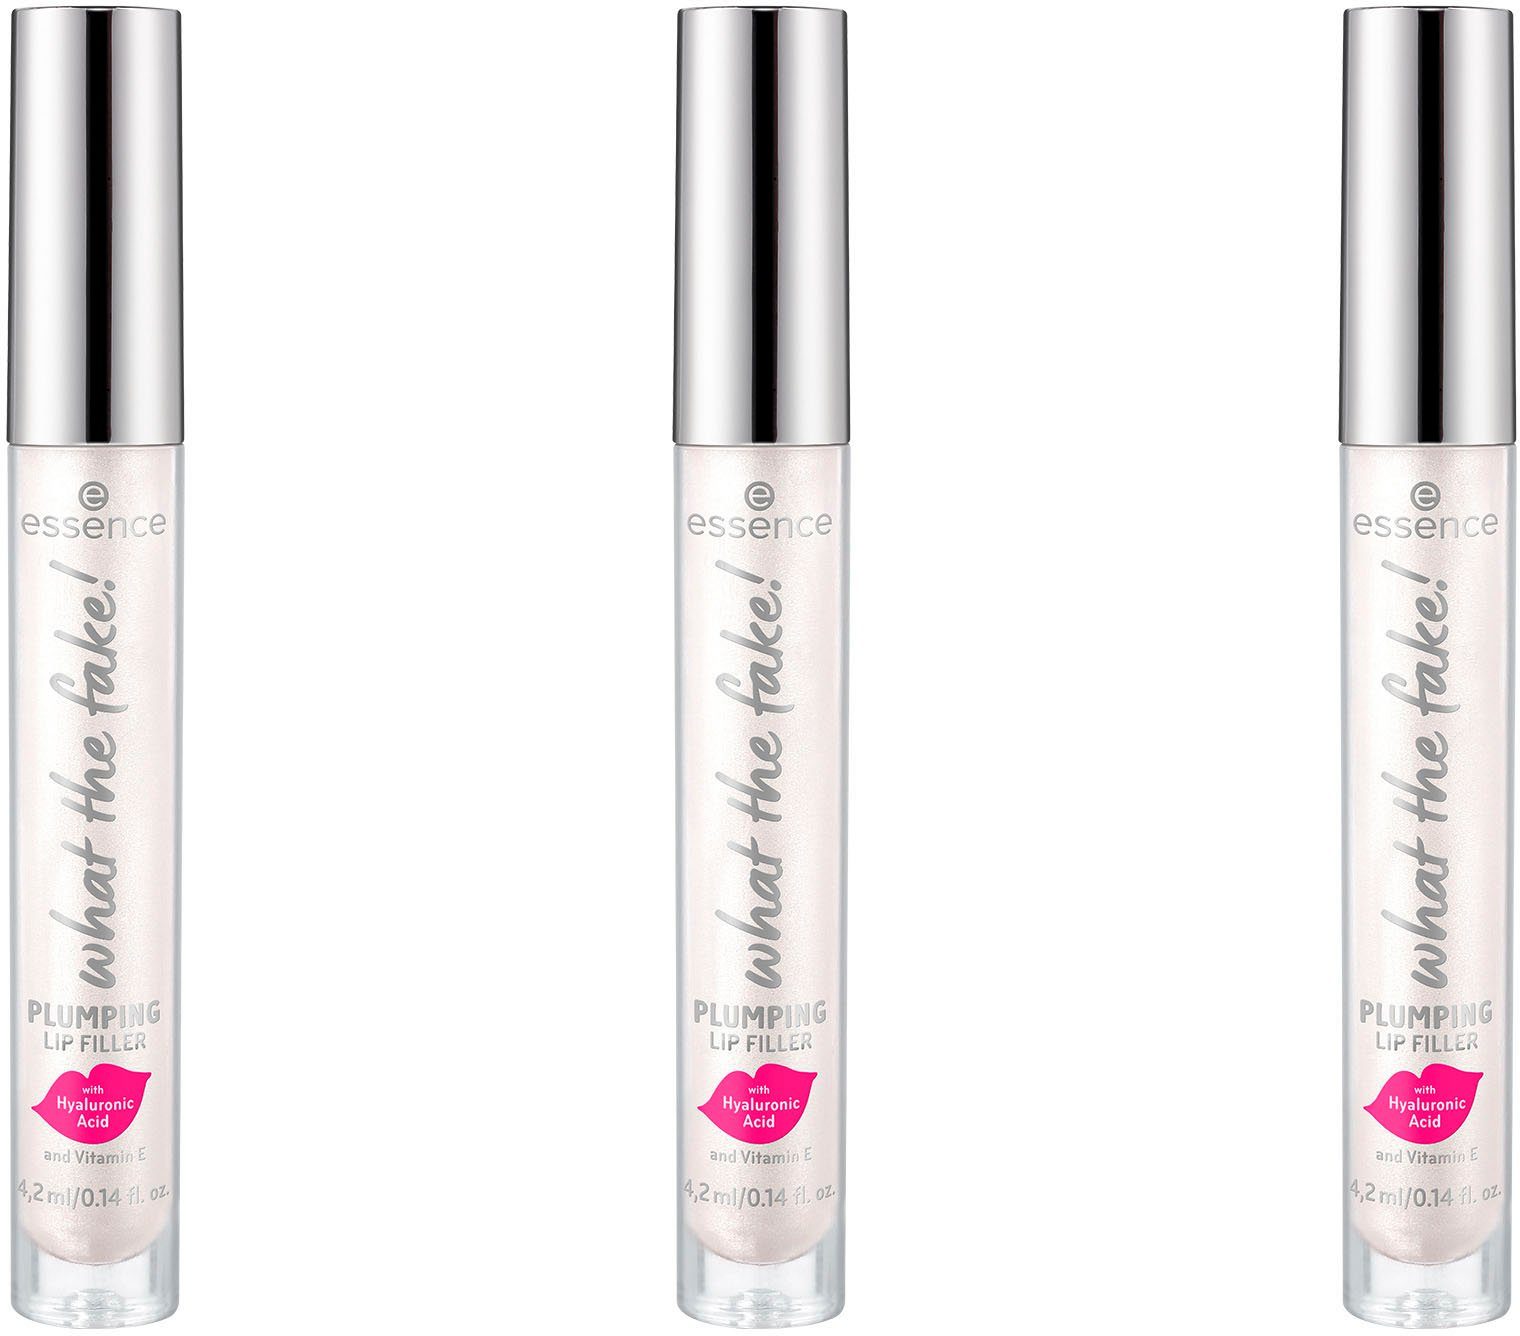 the LIP 3-tlg. fake! Essence PLUMPING Lipgloss what FILLER,